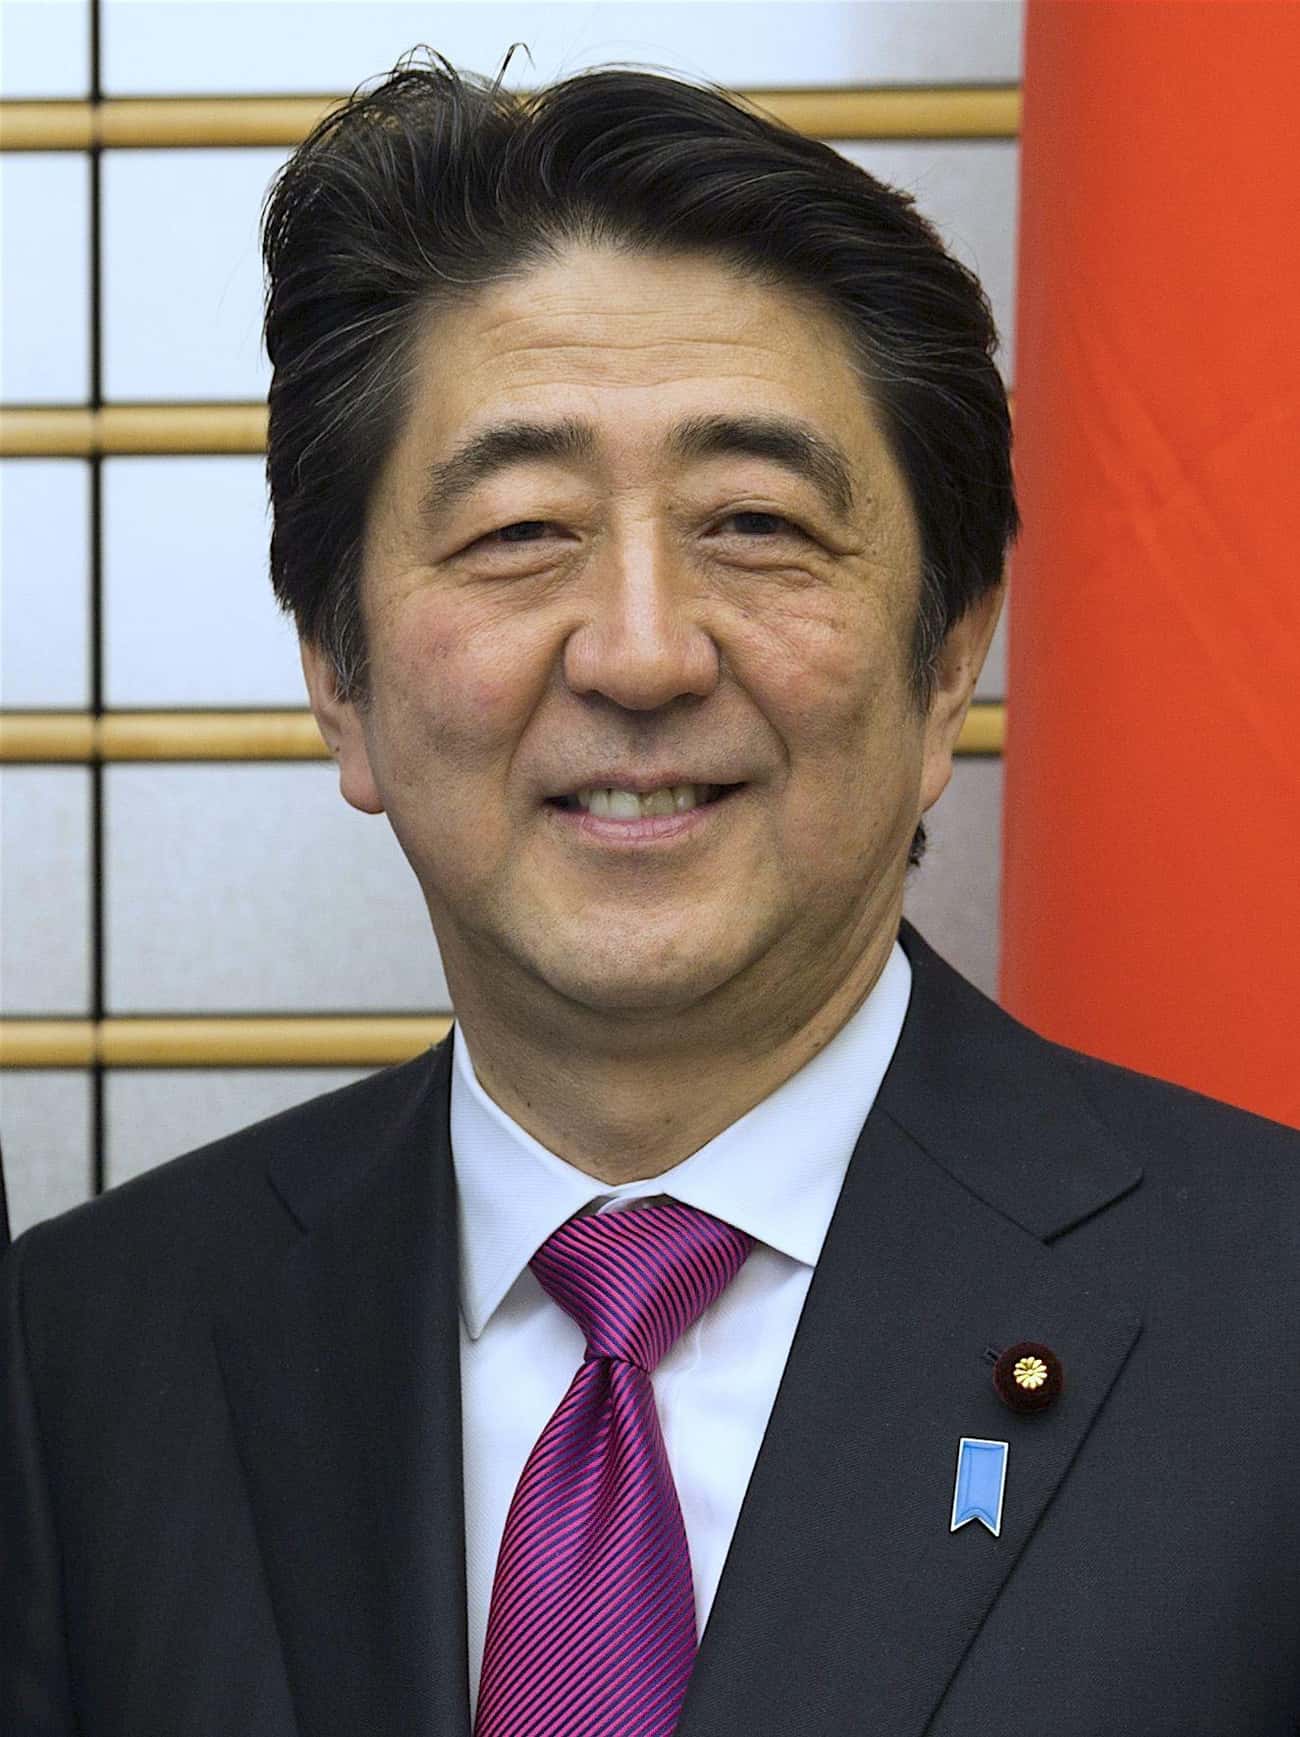 Prime Minister Shinzo Abe and Many Other Prominent Officials Are Members